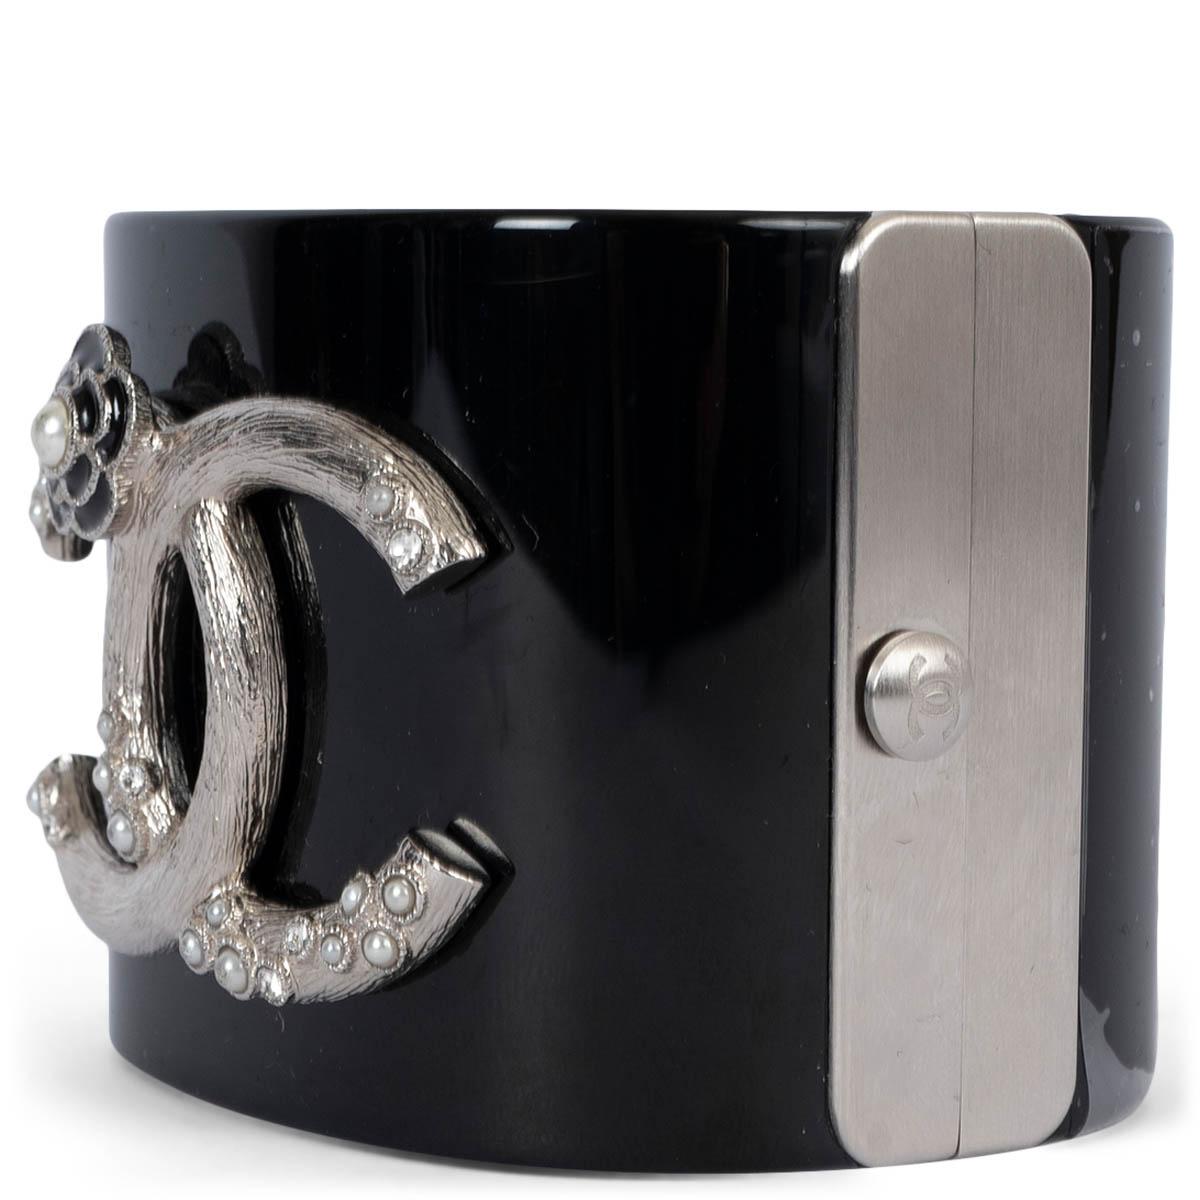 100% authentic Chanel 2014 Camellia cuff in black shiny resin embellished with CC logo with faux mini pearls. Brand new - protective plastic intact. Comes with dust bag and box. 

Measurements
Model	Chanel14C
Width	5.2cm (2in)
Circumference	17cm